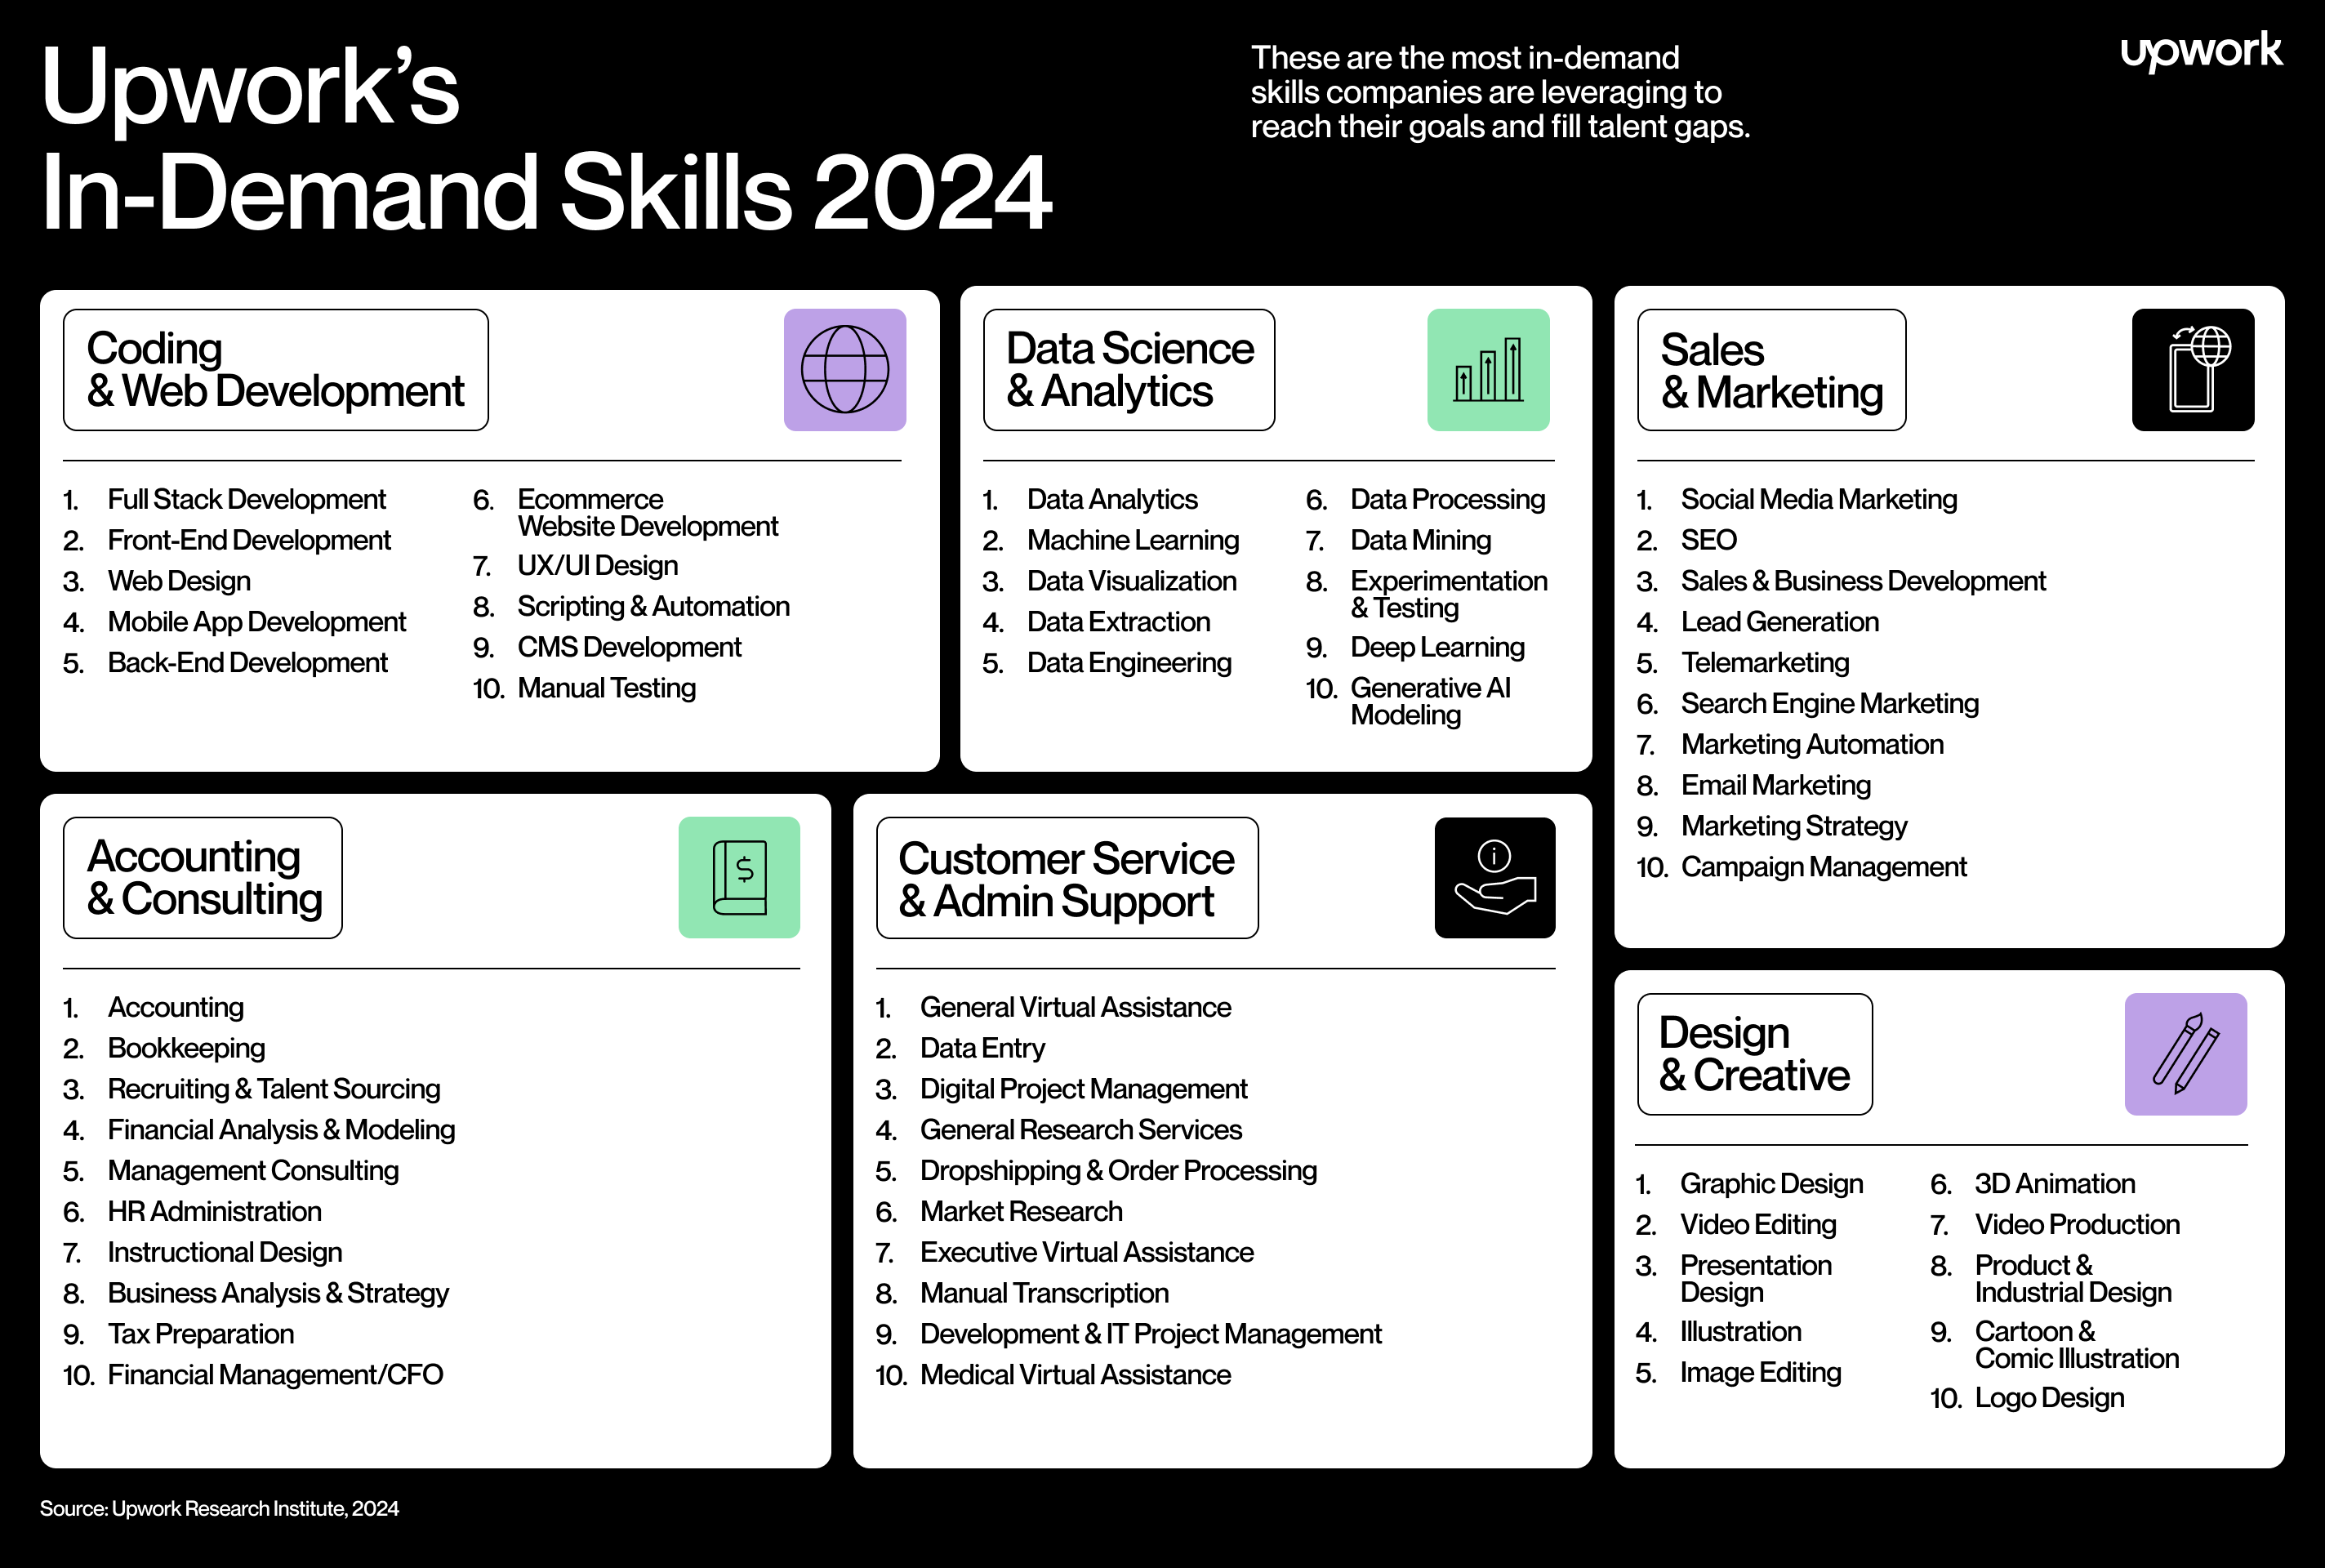 Upwork infographic showing the top 10 tech skills in various sectors.